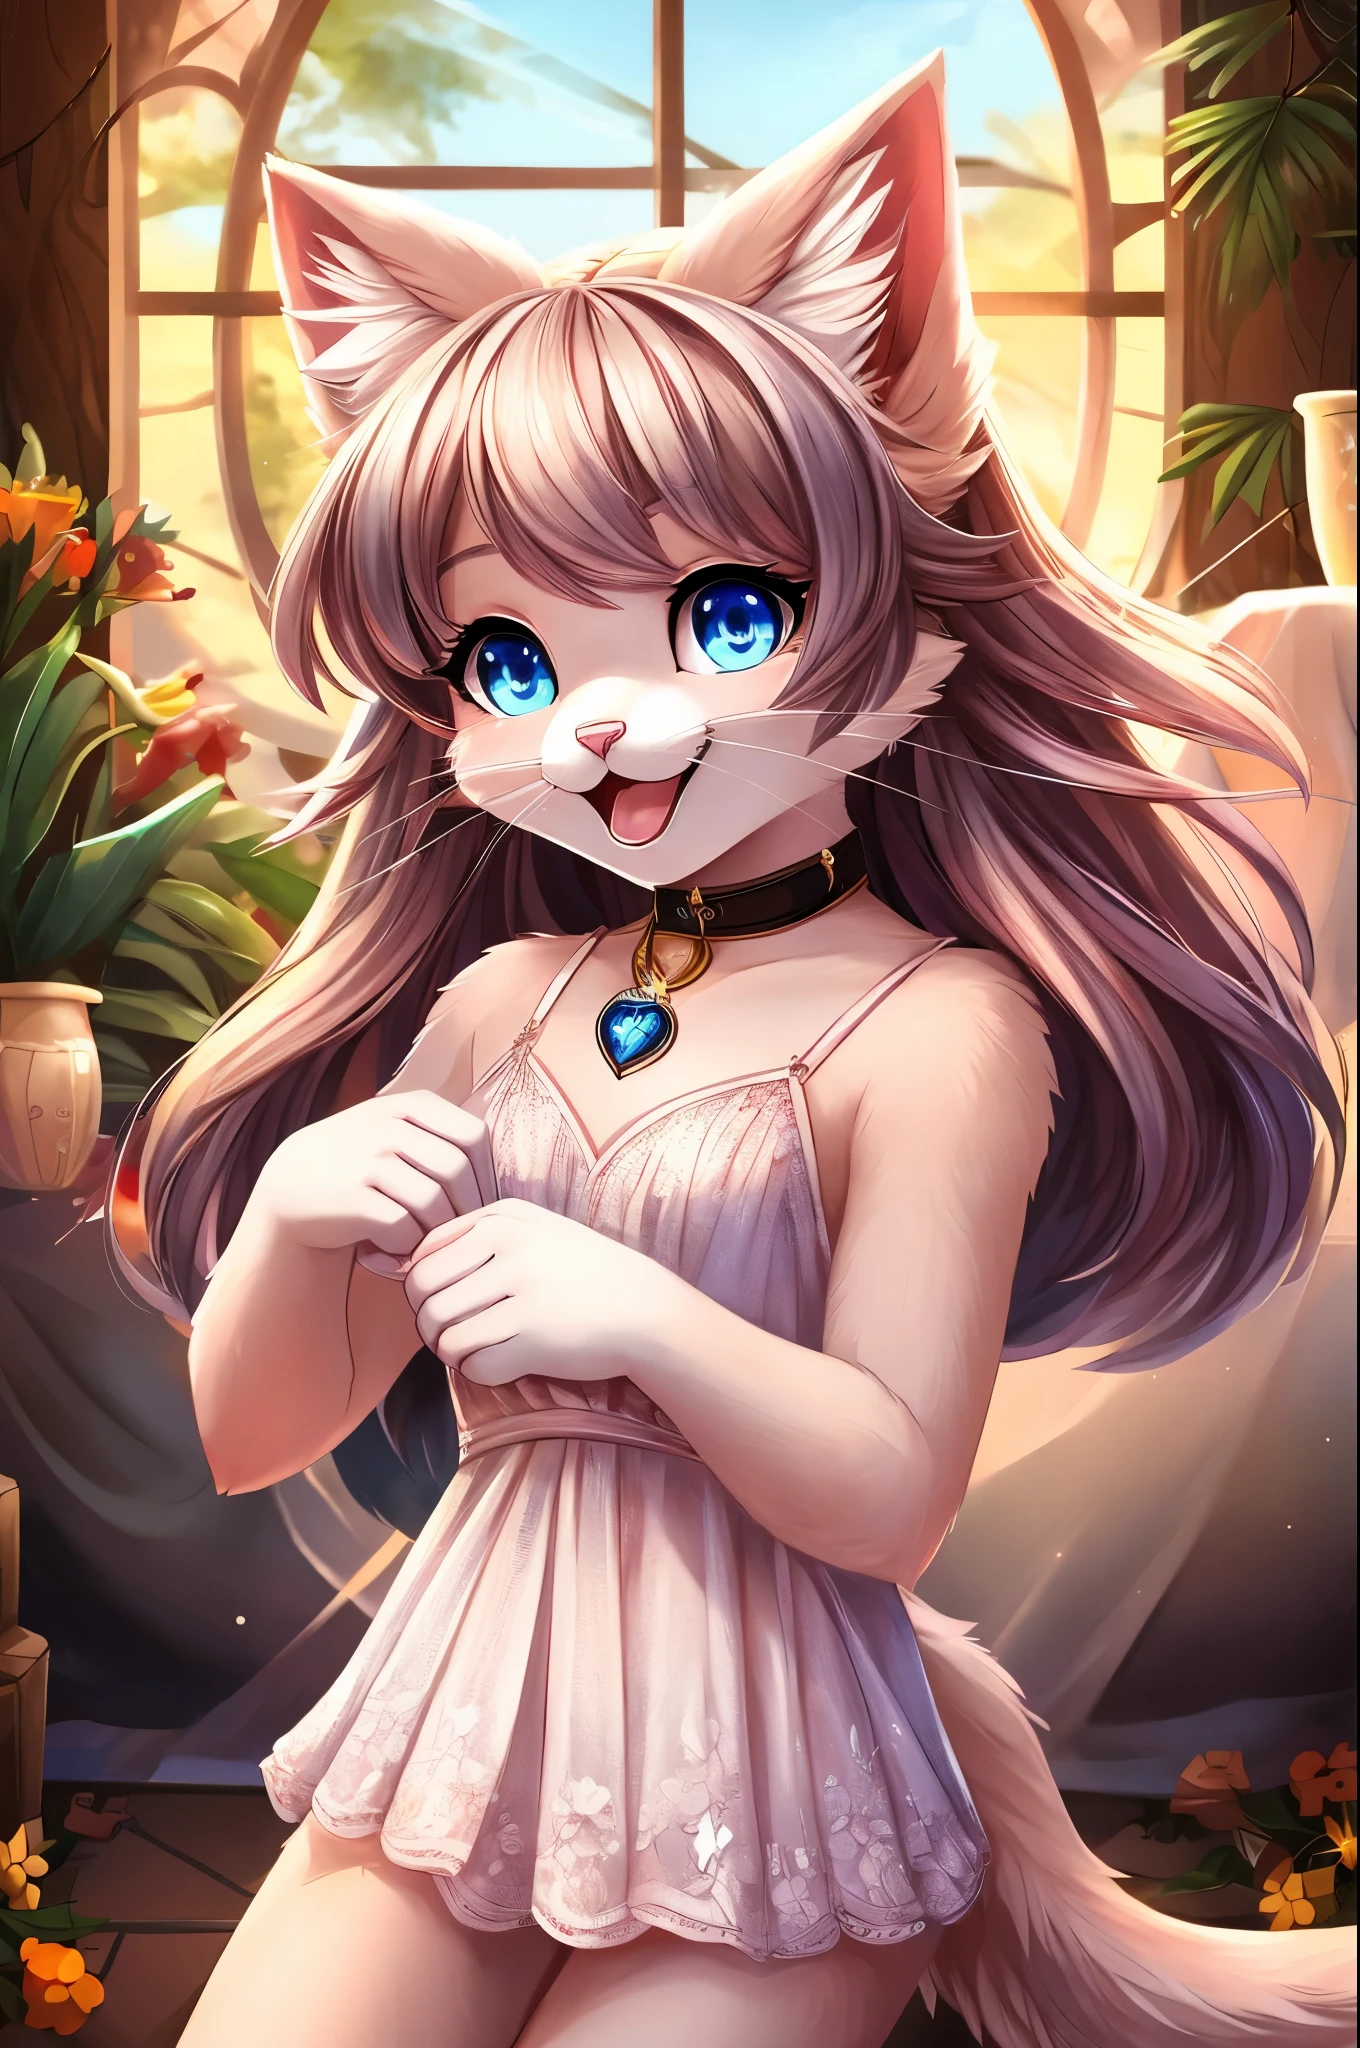 A charming white catgirl with soft, twinkling blue eyes and small pink nose is captured in this heartwarming scene. Her long, flowing tail swishes gently behind her as she gazes playfully at the viewer. Adorned in an elegant lace collar, her delicate feline ears are perked up curiously, adding to her allure. The anthro catgirl has a youthful and figure, with soft fur covering every inch of her body. She exudes cuteness and innocence that would melt even the iciest heart. Her whiskers twitch in delight as she strikes an adorable pose, showcasing her unique human-like hands and paws. The playful gleam in her eyes speaks volumes about her spirited personality and boundless energy, making this anthro catgirl a truly captivating sight to behold.